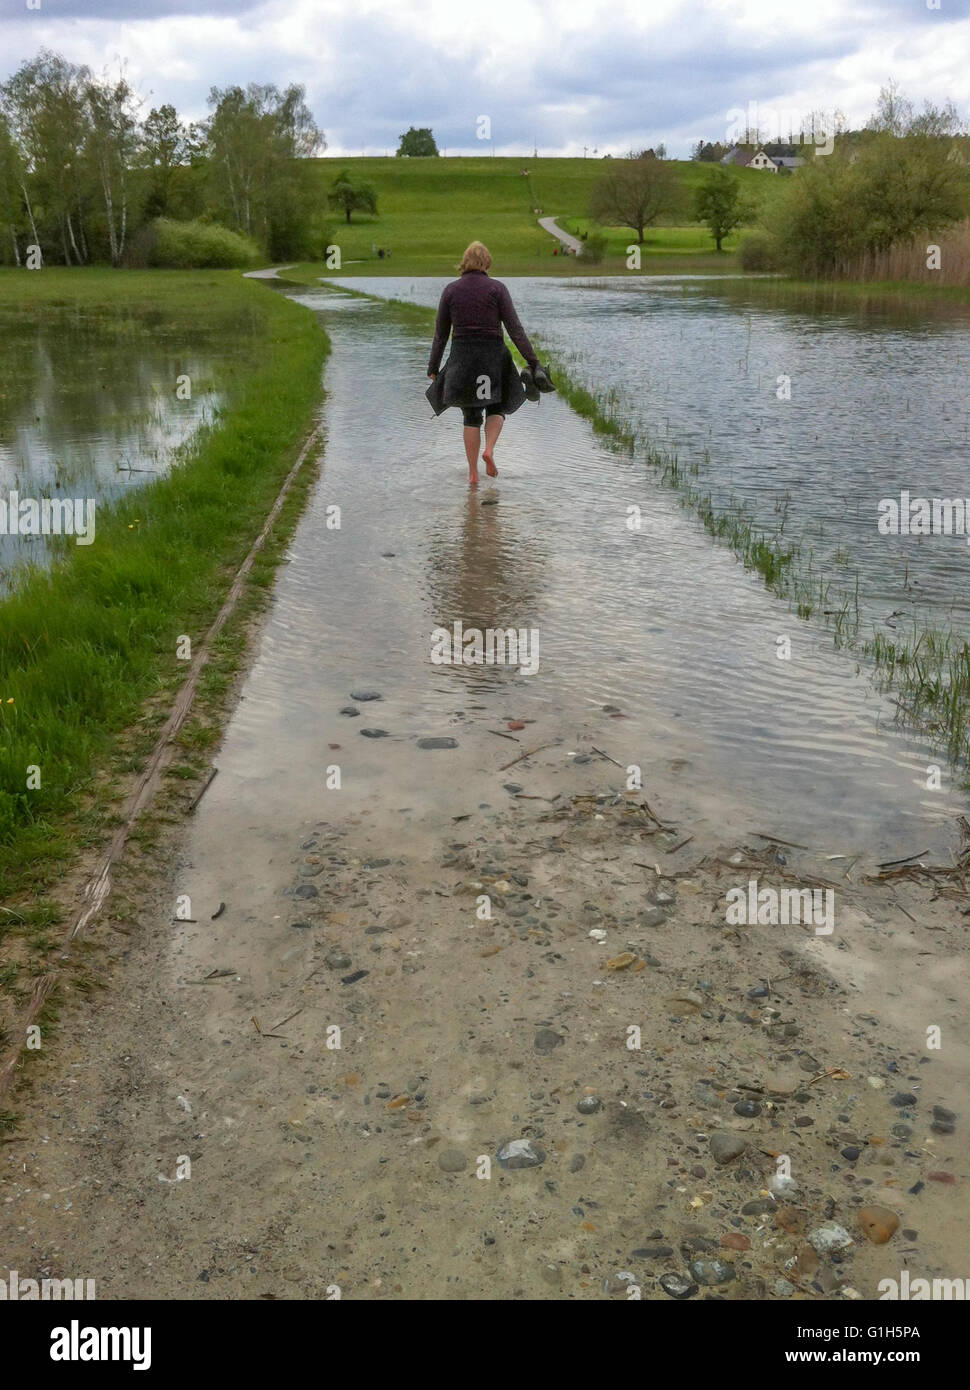 Pfaeffikon/Zurich, Switzerland - May 15, 2016: A woman has taken off her shoes and wades through the water that had overflooded a lakeside hiking trail at Lake Pfaeffikon, Switzerland (canton Zurich). After heavy rainfalls, many rivers and lakes in Switzerland burst their banks. Credit:  Erik Tham/Alamy Live News Stock Photo